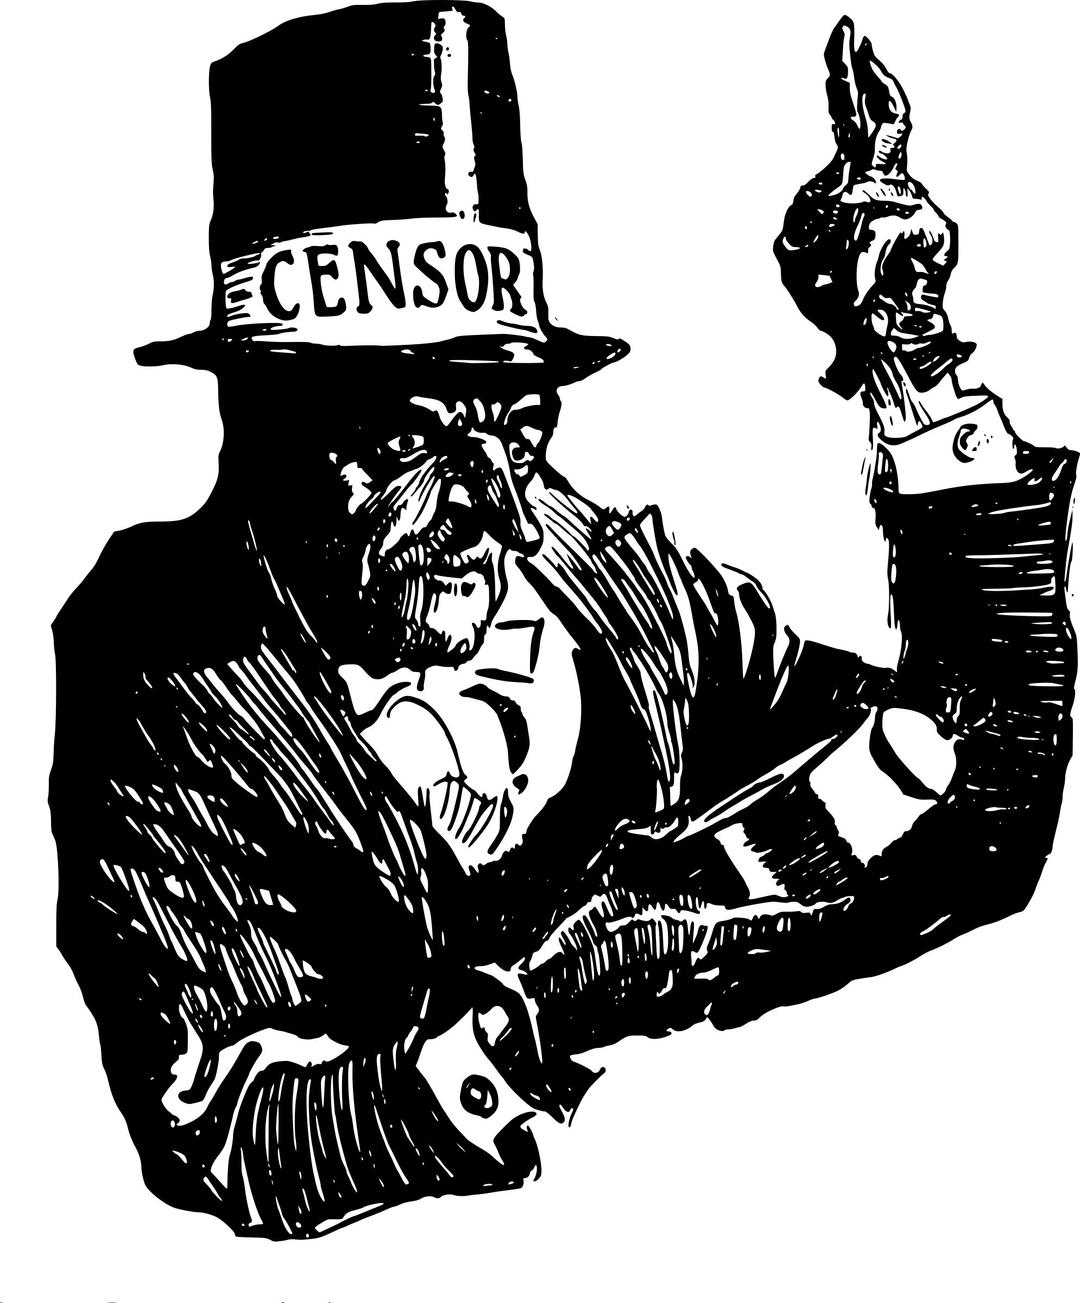 Censorship is like an Old Man png transparent